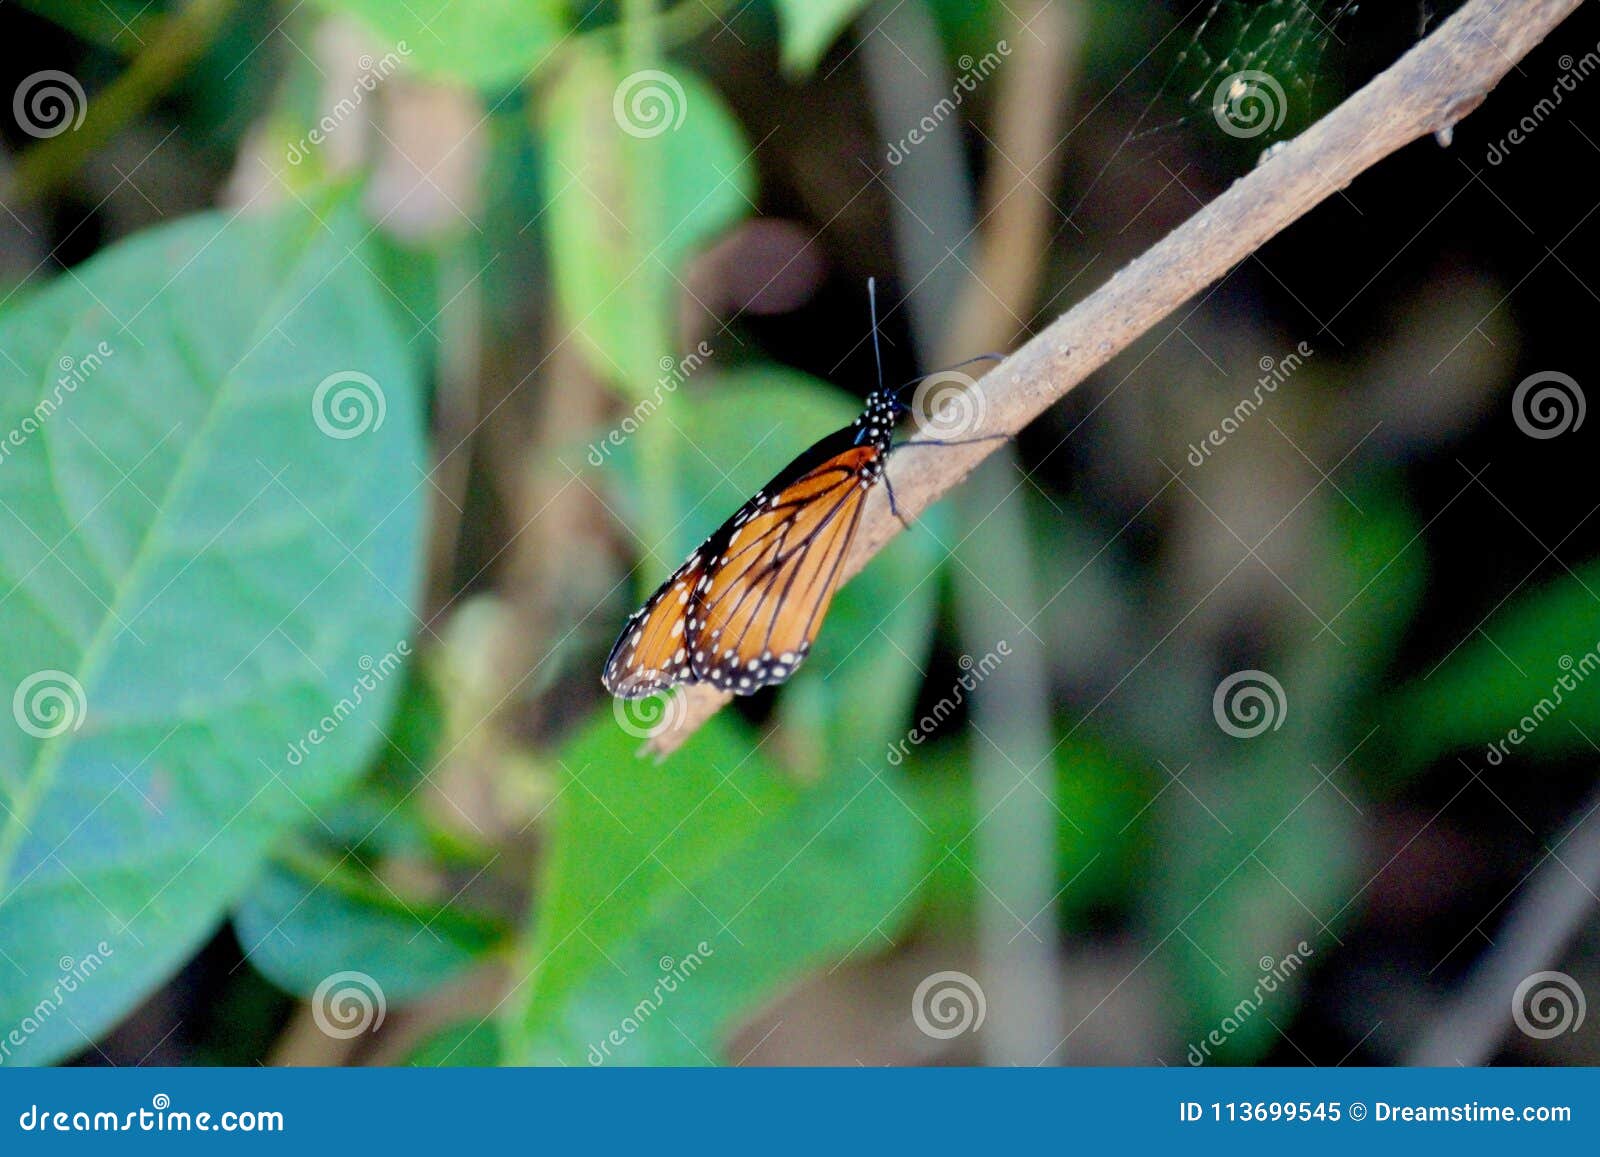 Butterfly Trail 2 stock image. Image of swarming, pretty ...